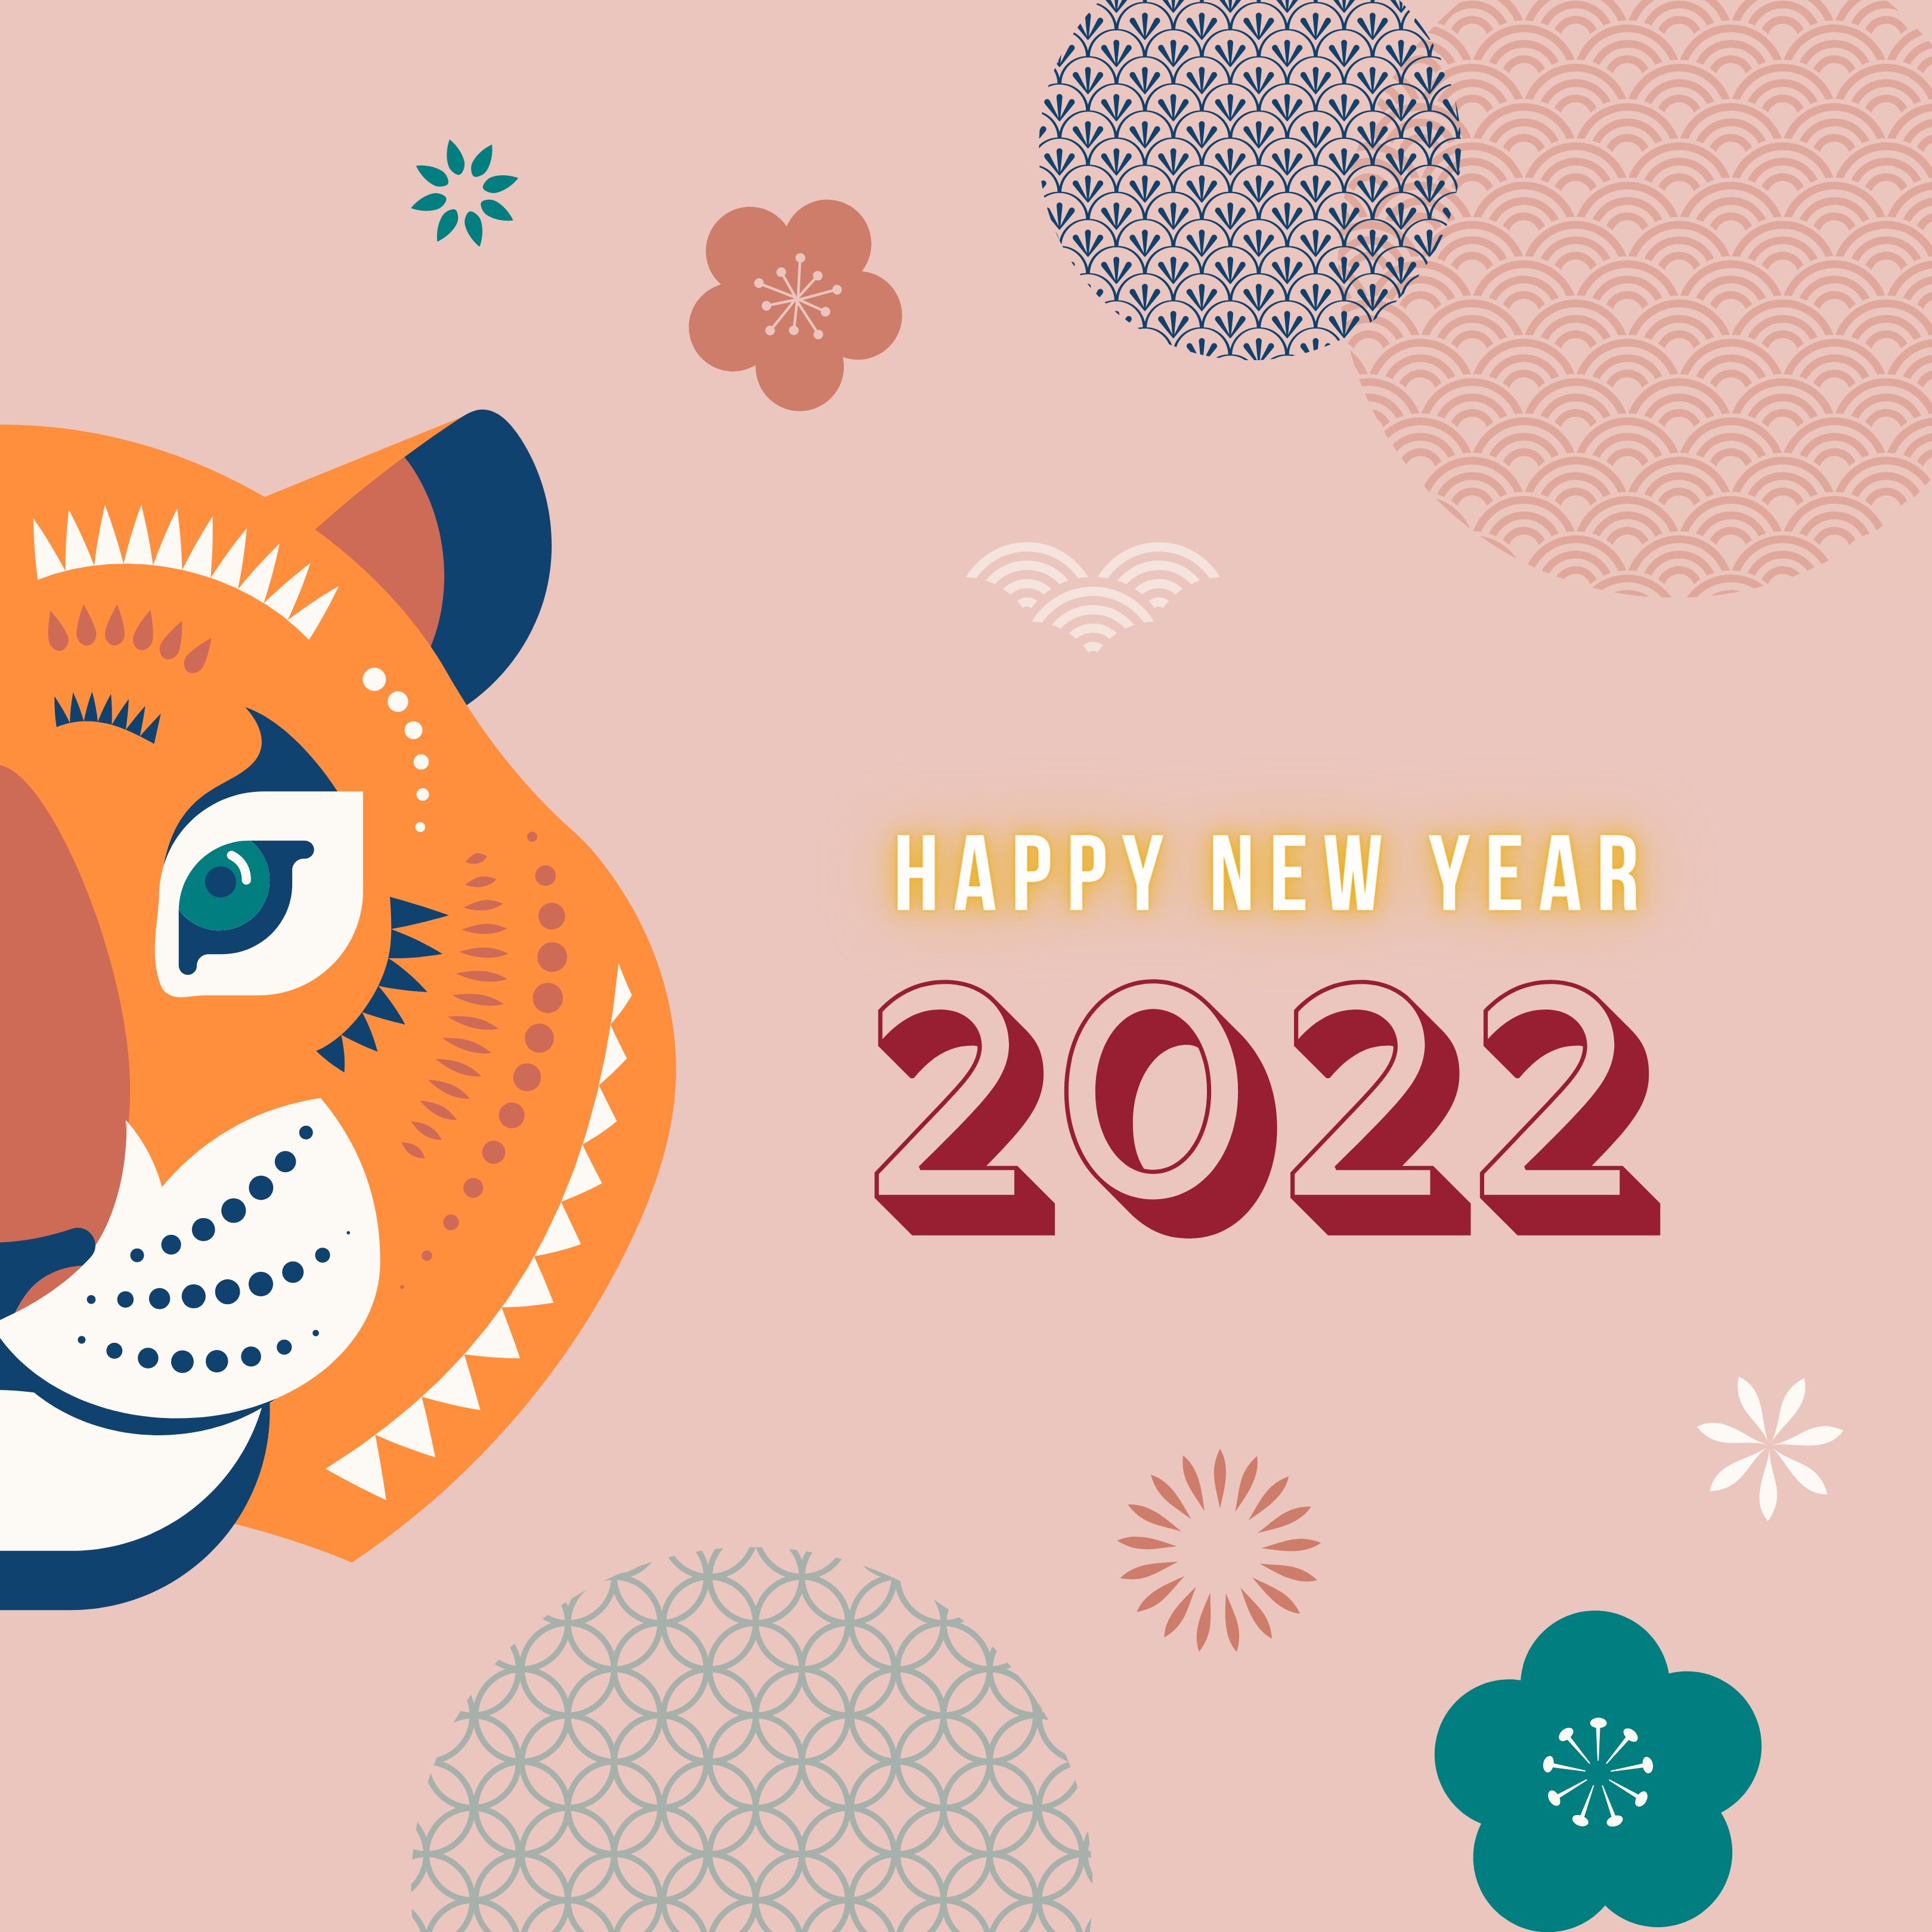 Lunisolar Calendar 2022 Umsl Education Abroad On Twitter: "Happy Lunar New Year And 2022 Is The  Year Of The Tigers! Lunar New Year Is The Beginning Of A Calendar Year  Whose Months Are Moon Cycles,